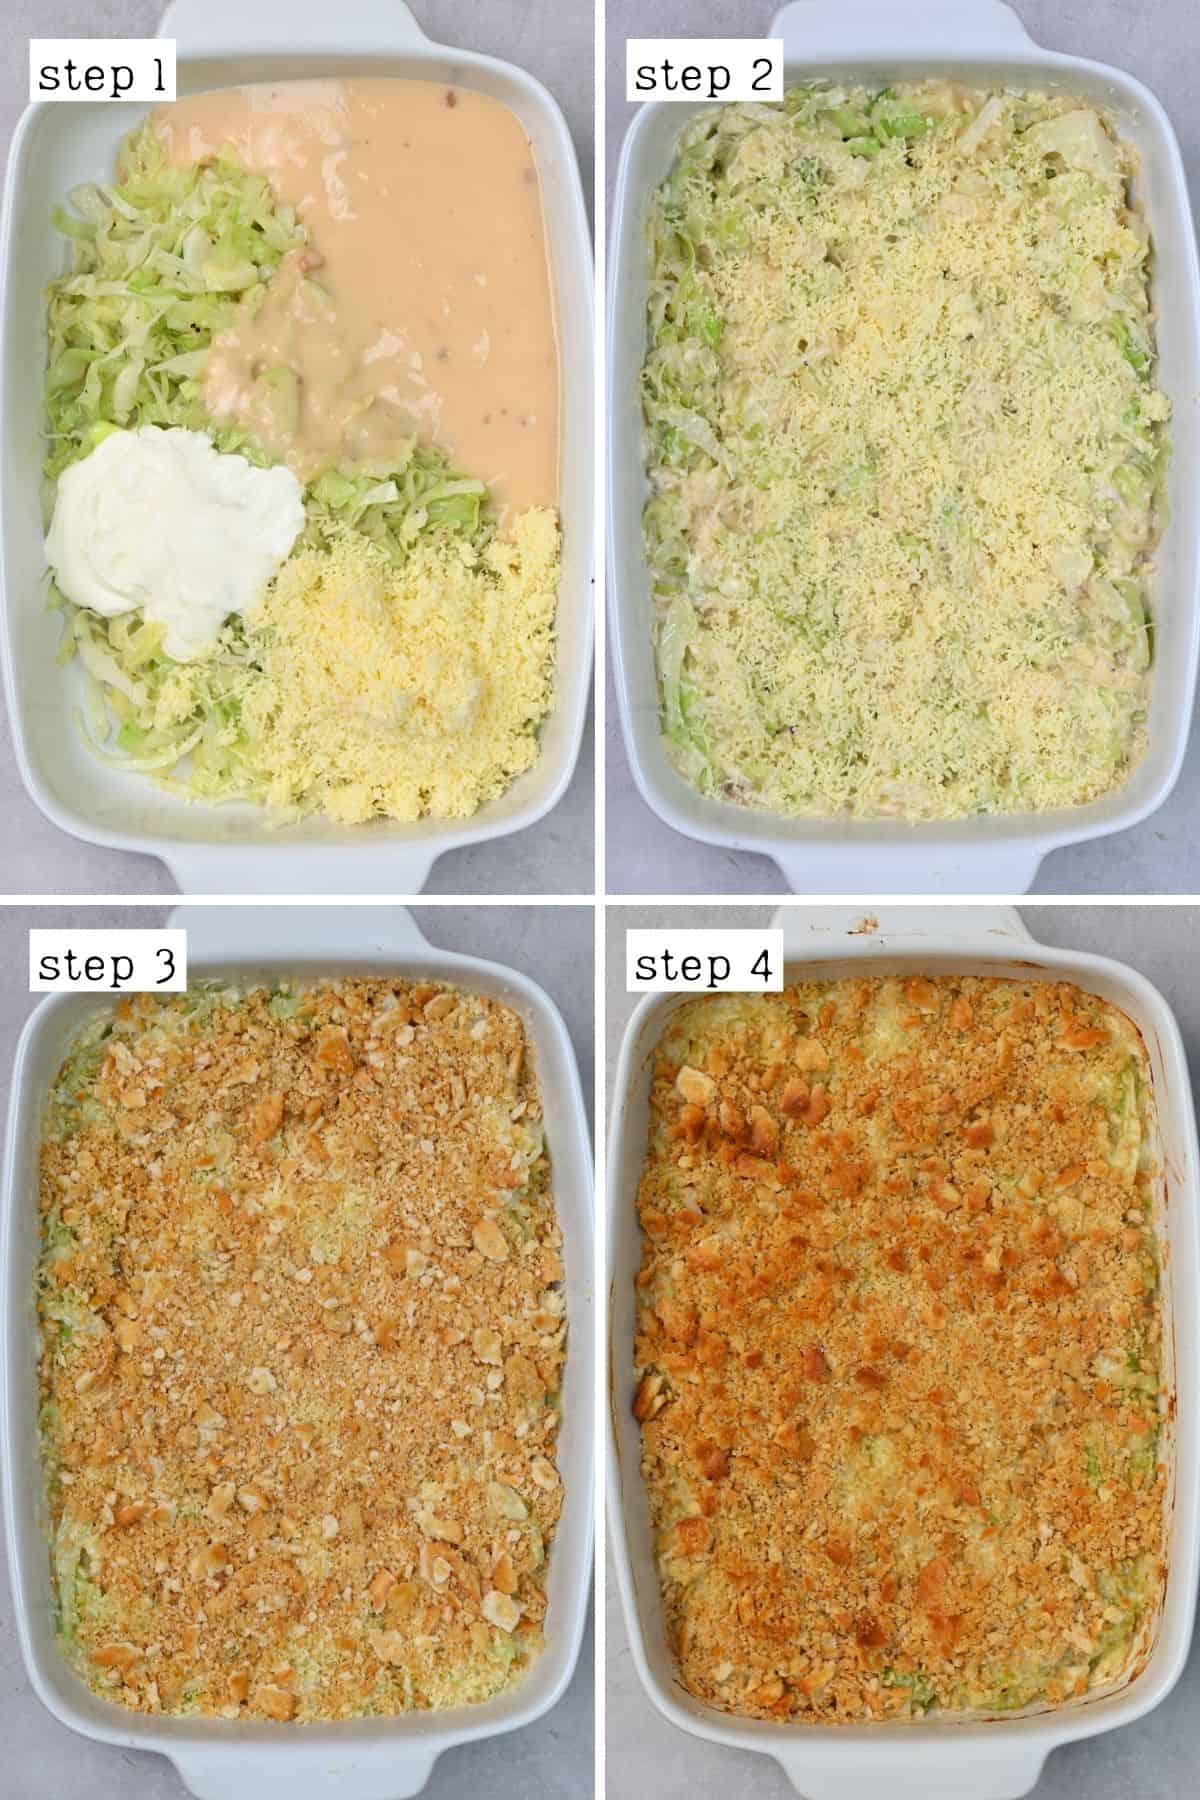 Steps for assembling cabbage casserole